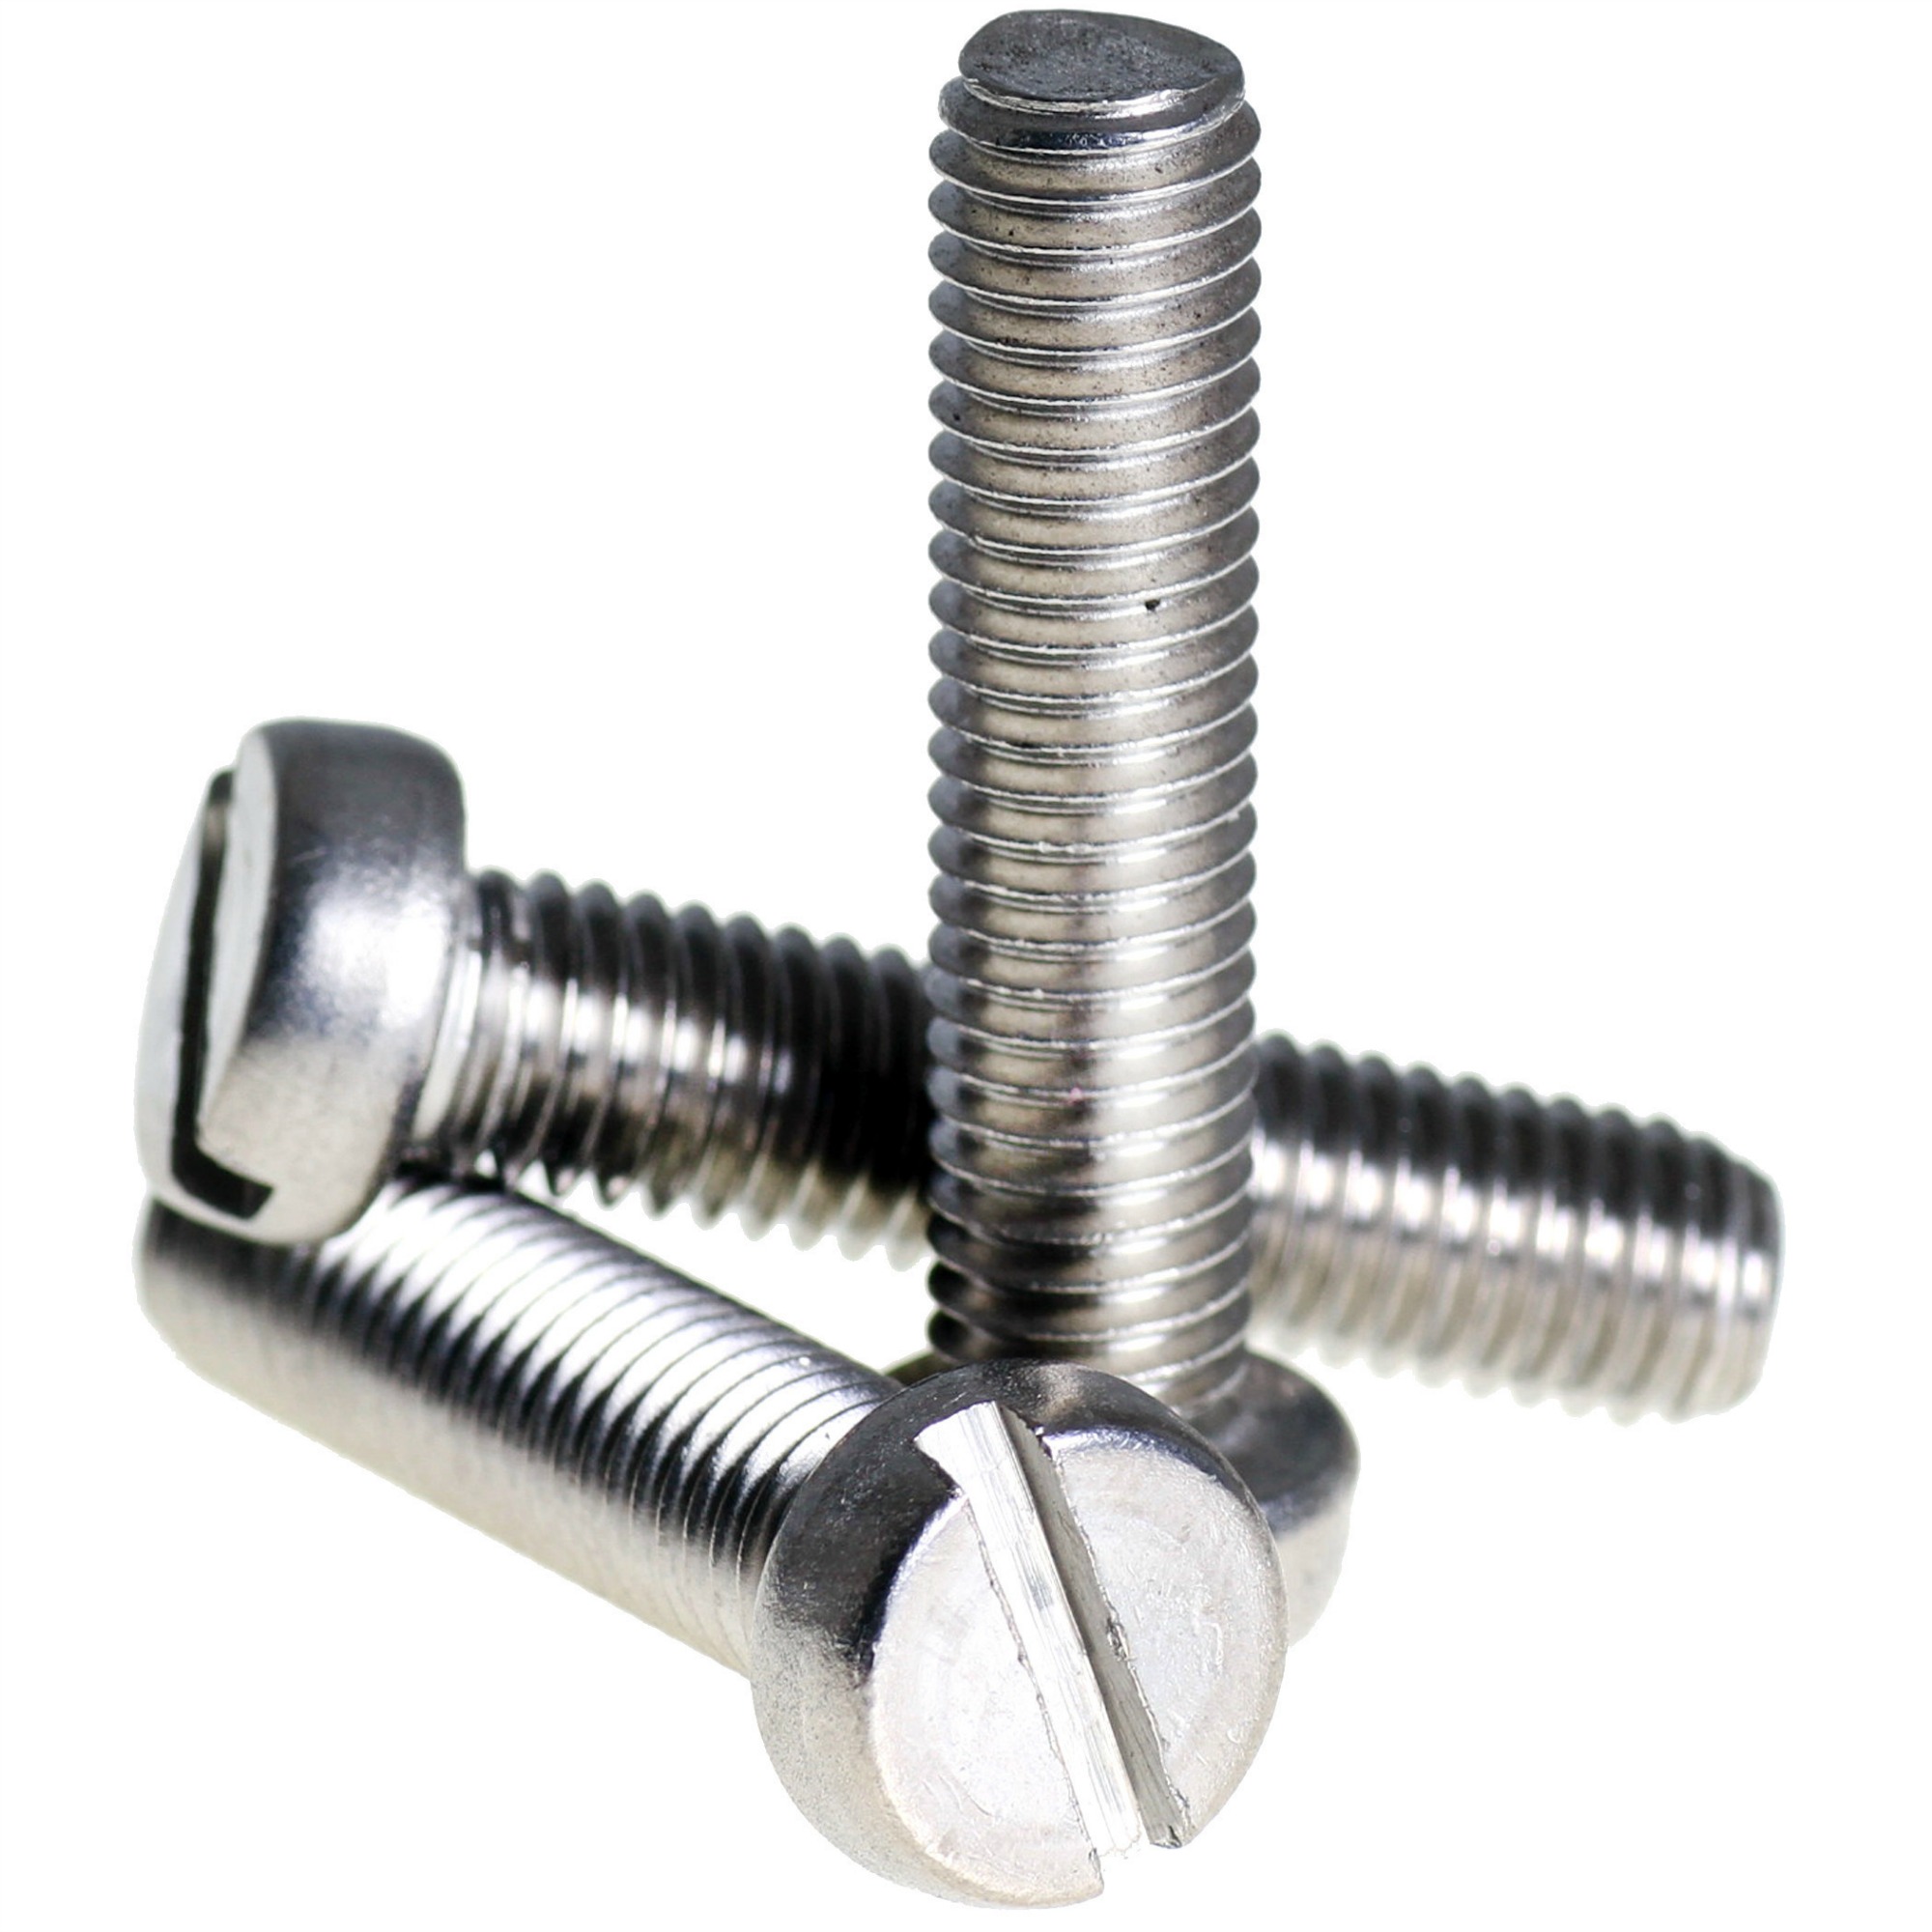 M5 x 60mm SLOTTED CHEESE HEAD SCREWS MACHINE SCREWS STAINLESS STEEL A2 DIN 84